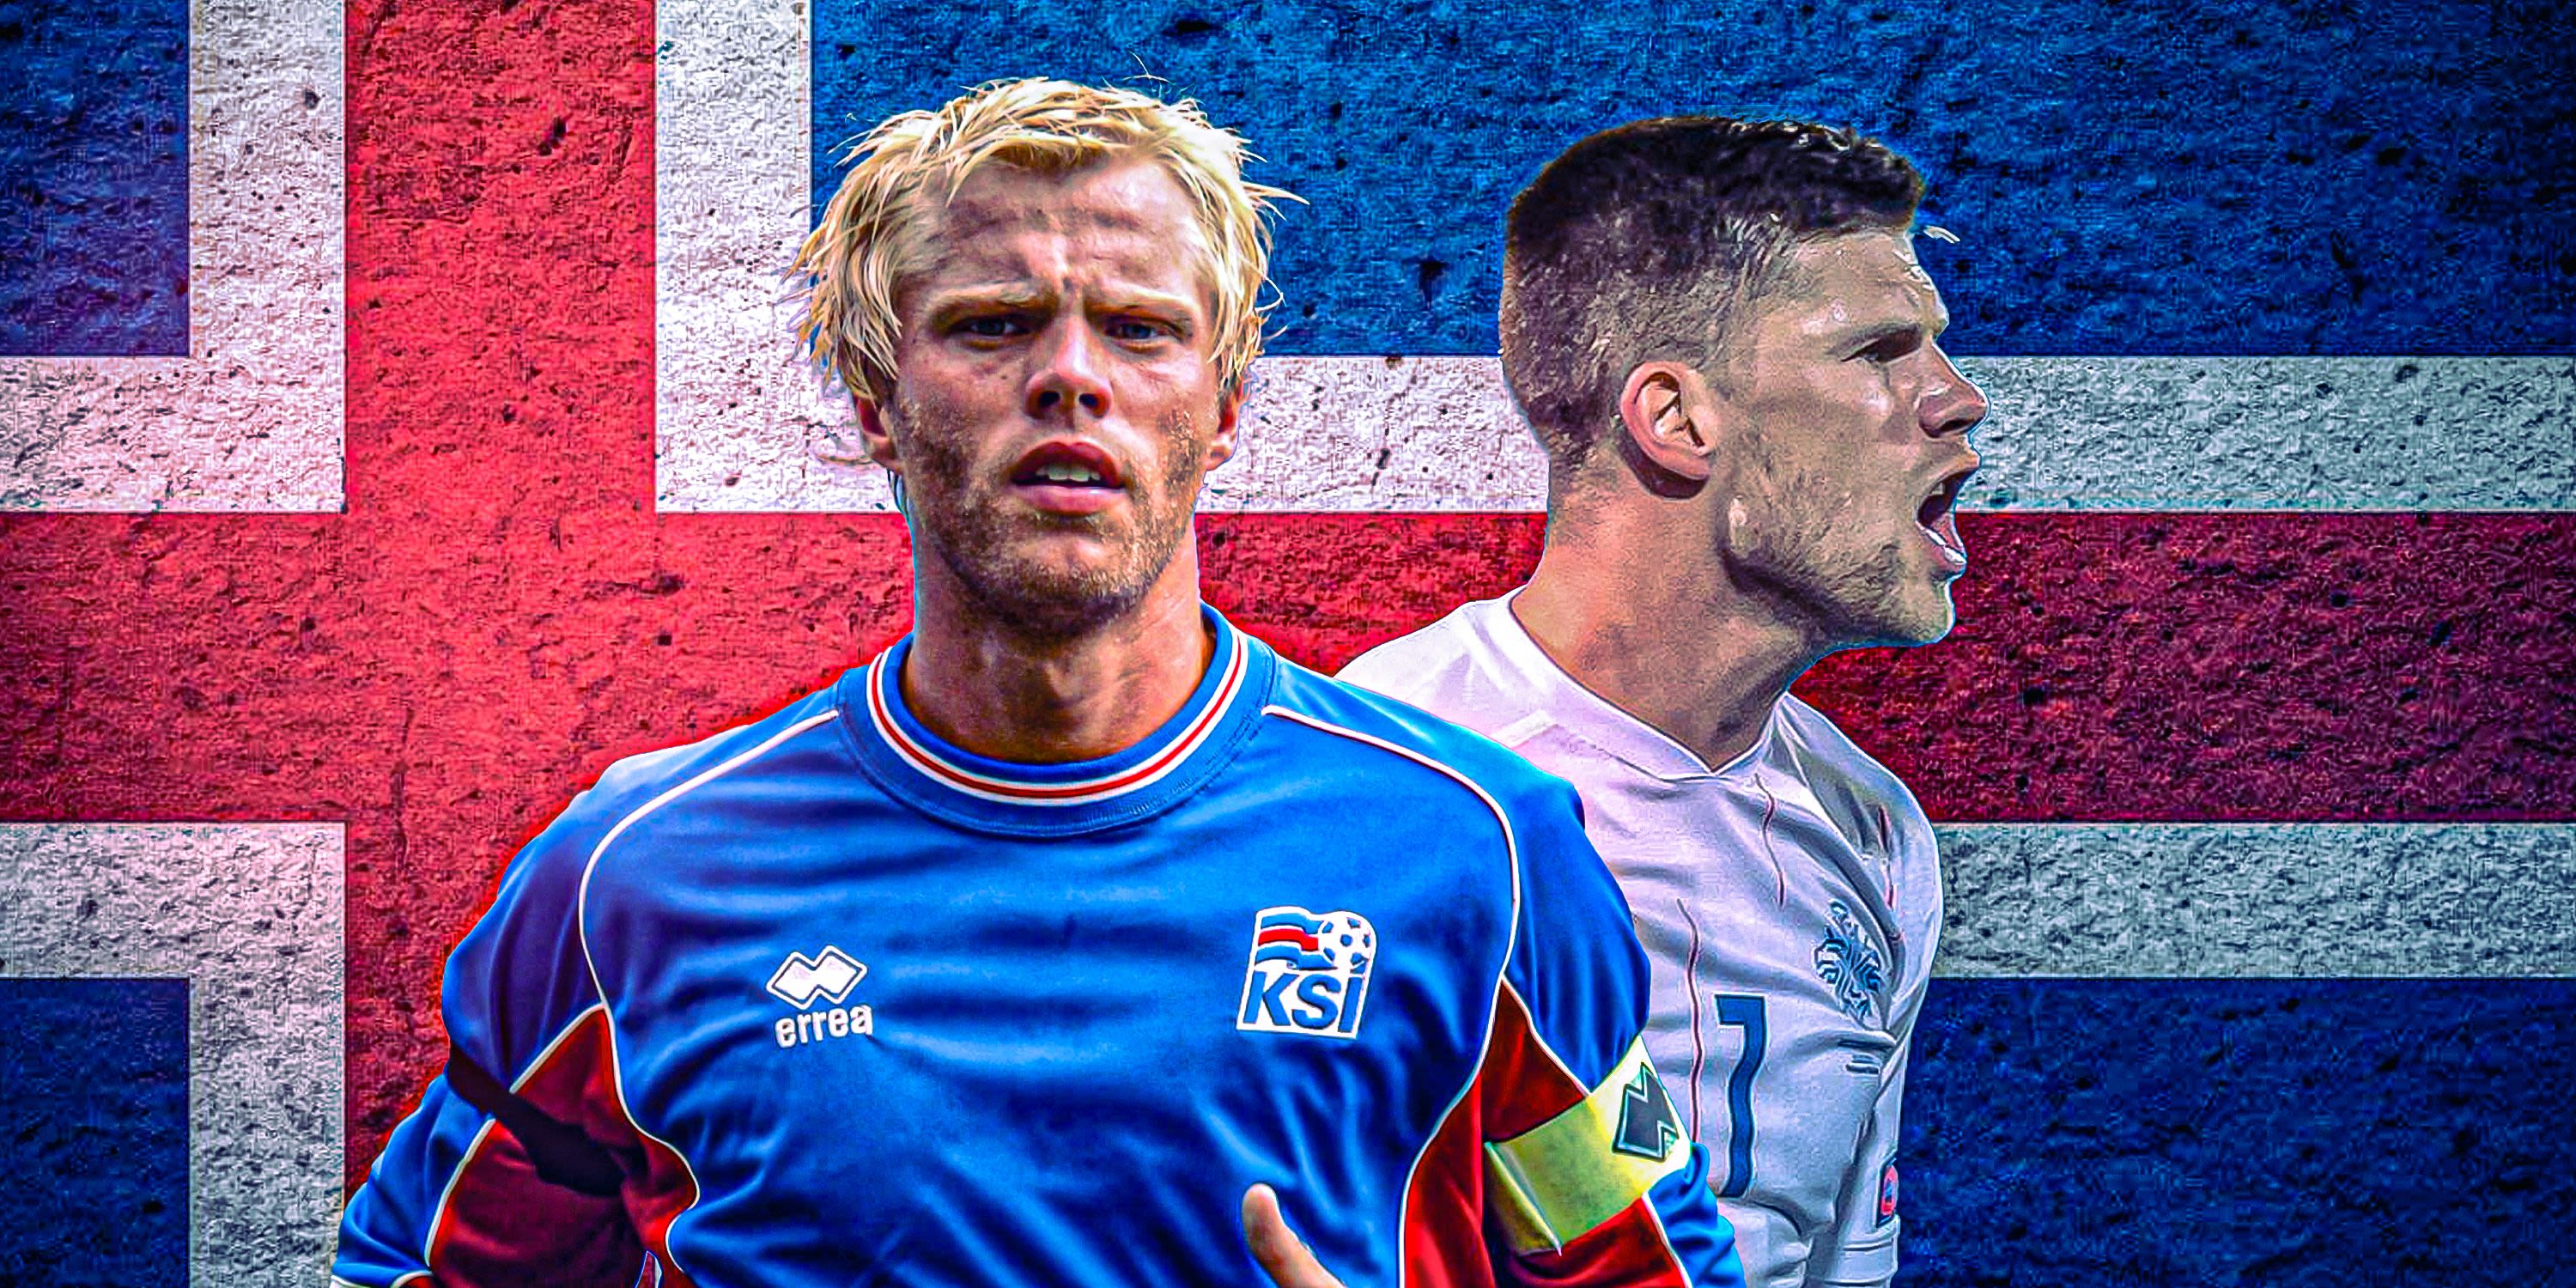 The 10 greatest Iceland players in football history have been ranked